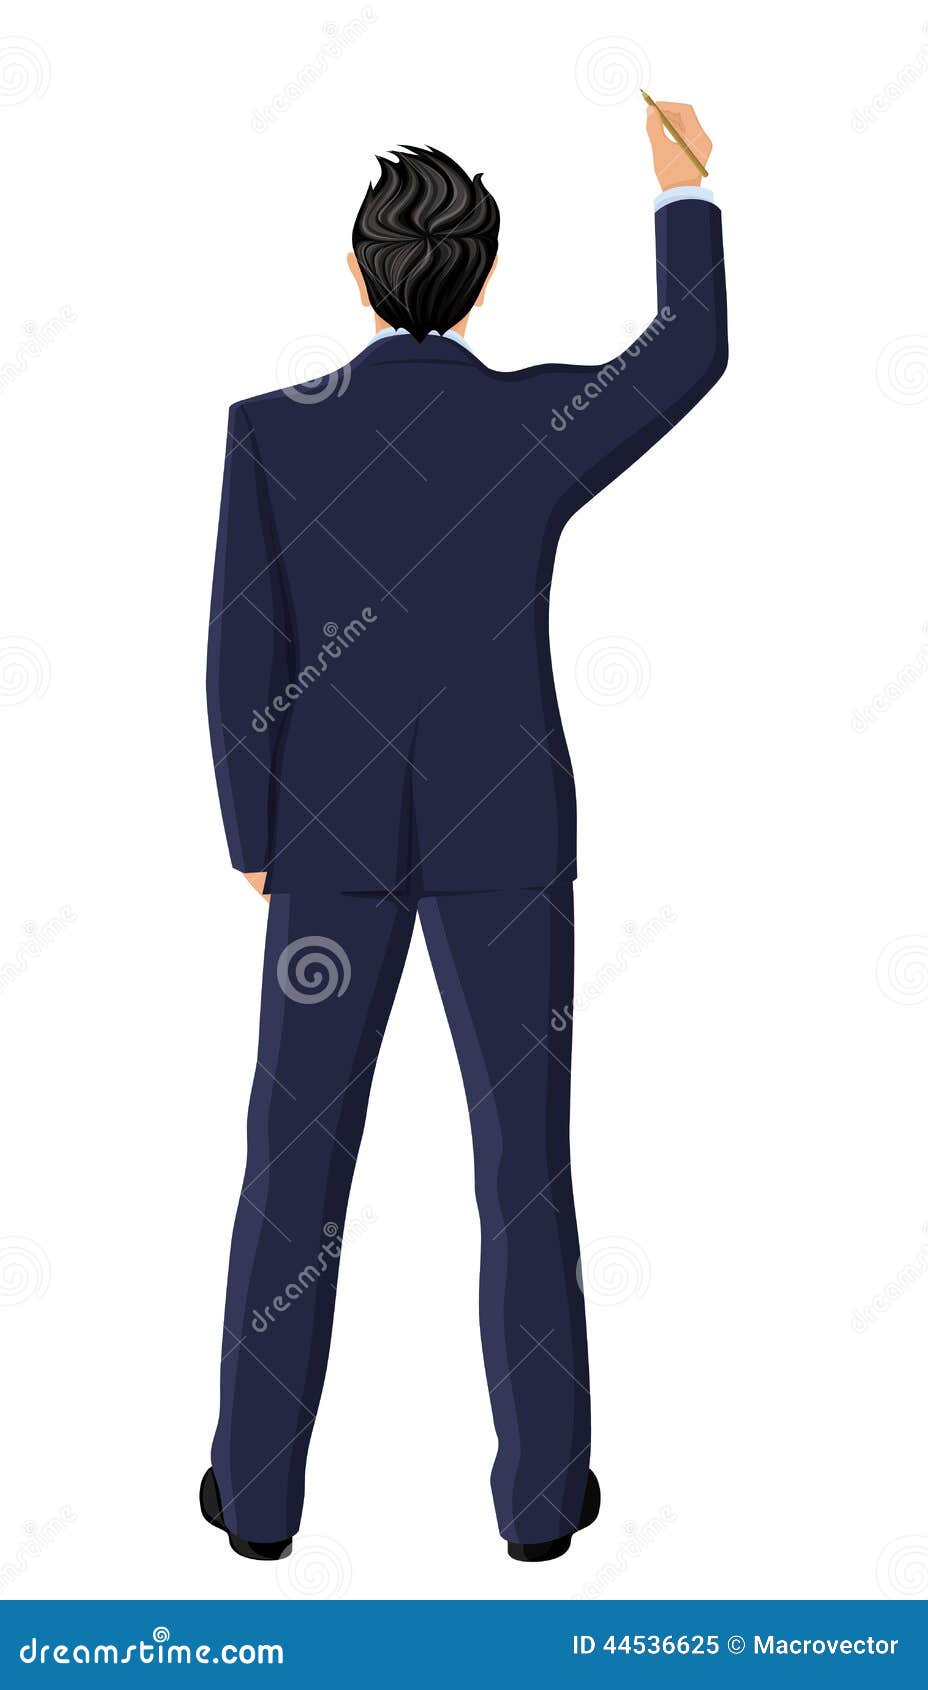 Businessman back view stock vector. Illustration of hand - 44536625